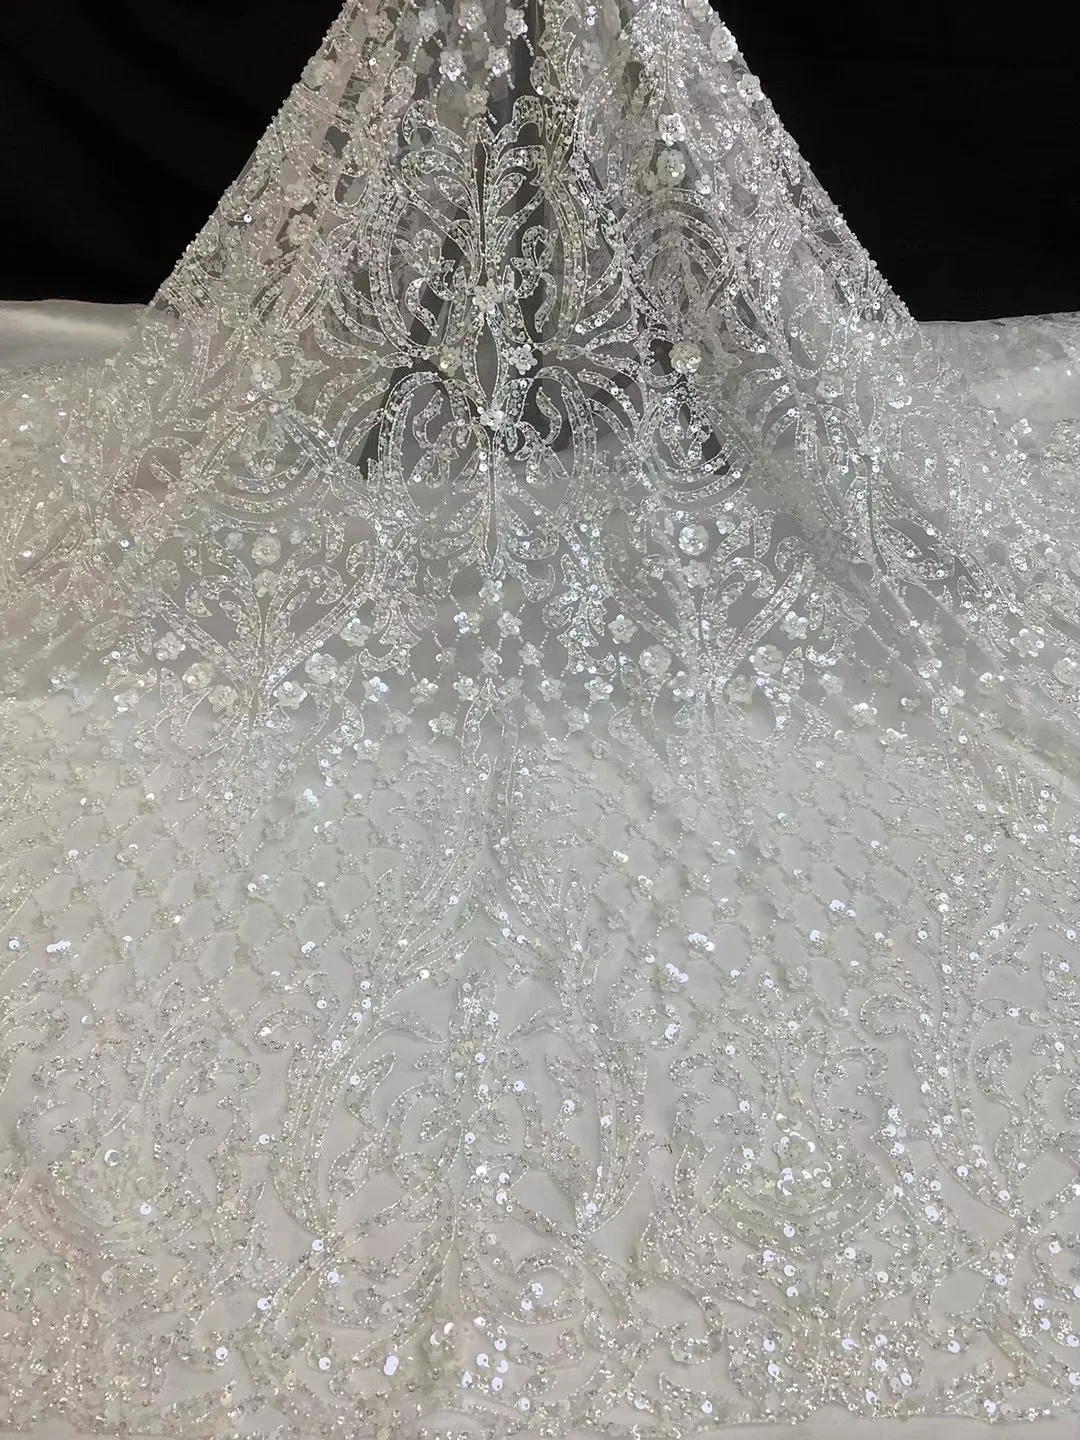 https://ae01.alicdn.com/kf/H1f2f9440857343769d2c4f6767987877z/Hot-selling-exquisite-bead-tube-sequin-laminated-white-wedding-dress-embroidery-suitable-for-wedding-dress-ax.jpg